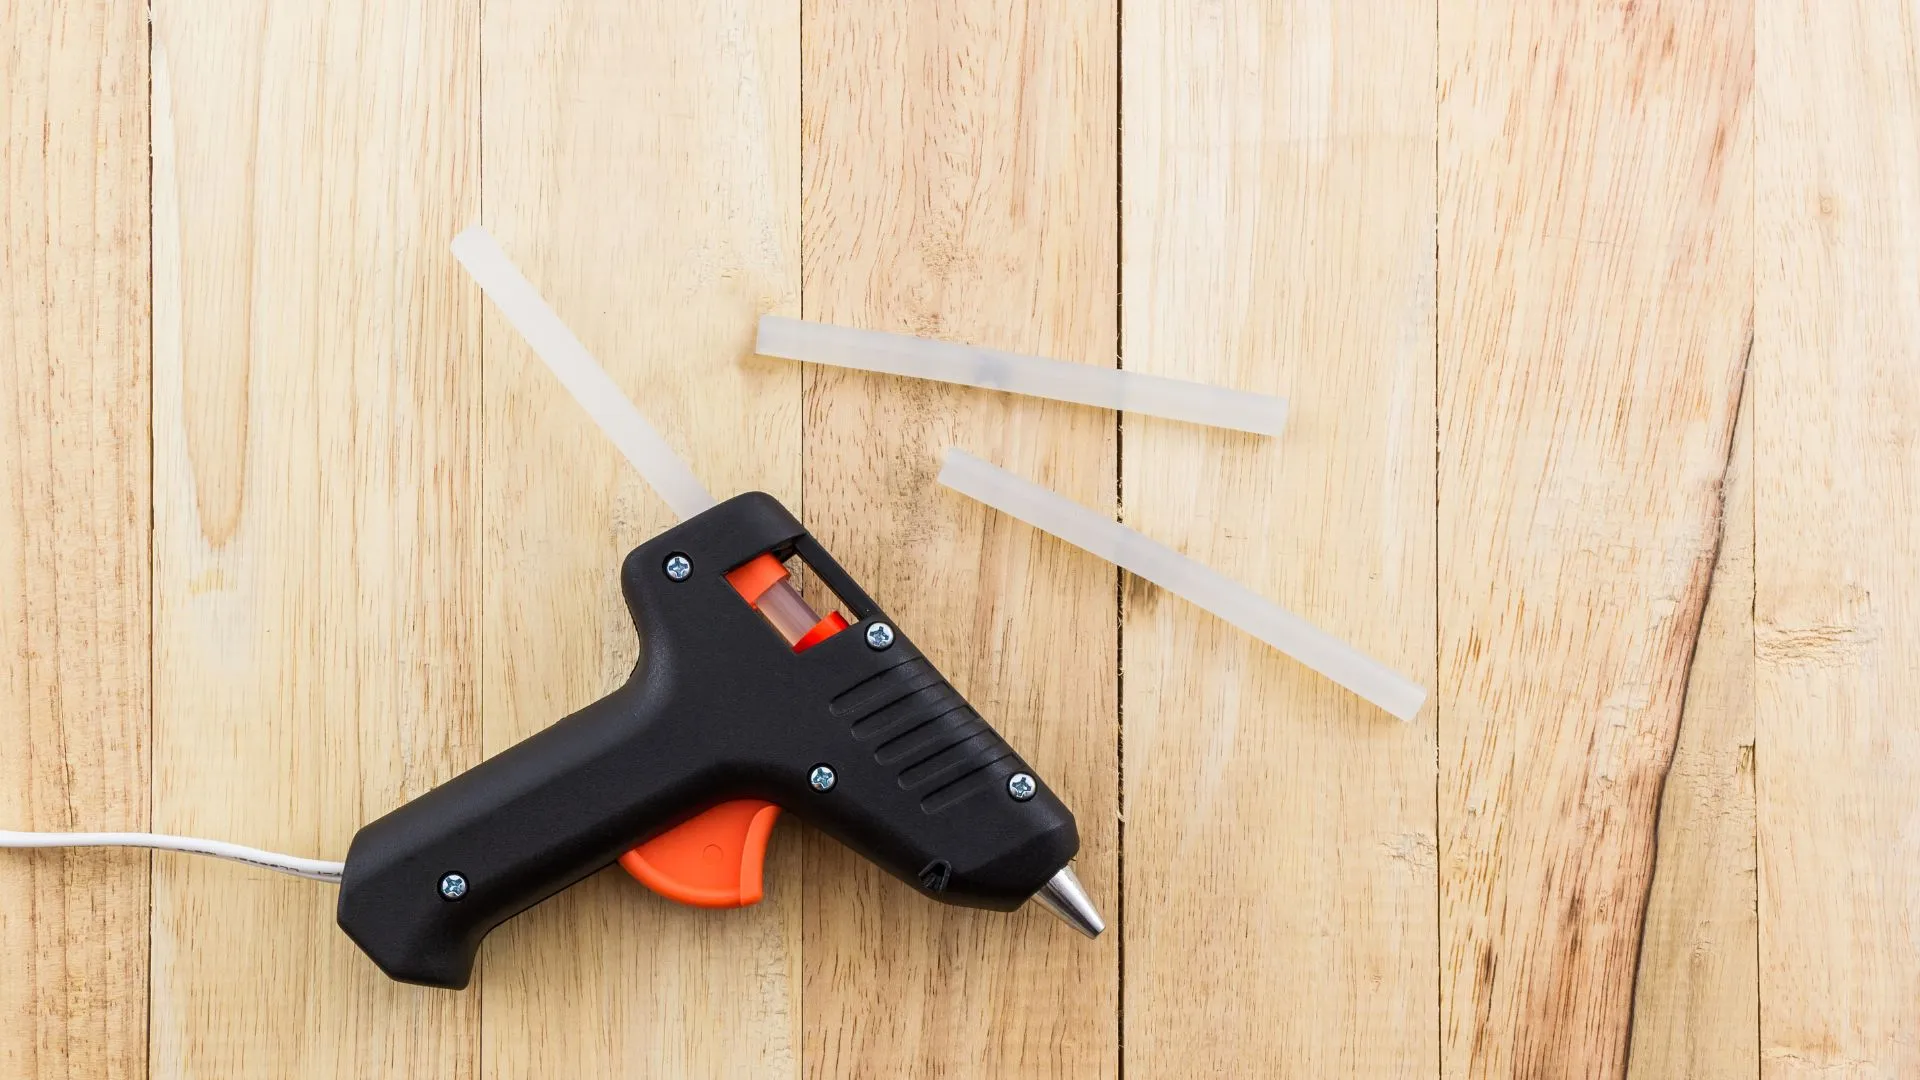 How to Use a Glue Gun on Plastic